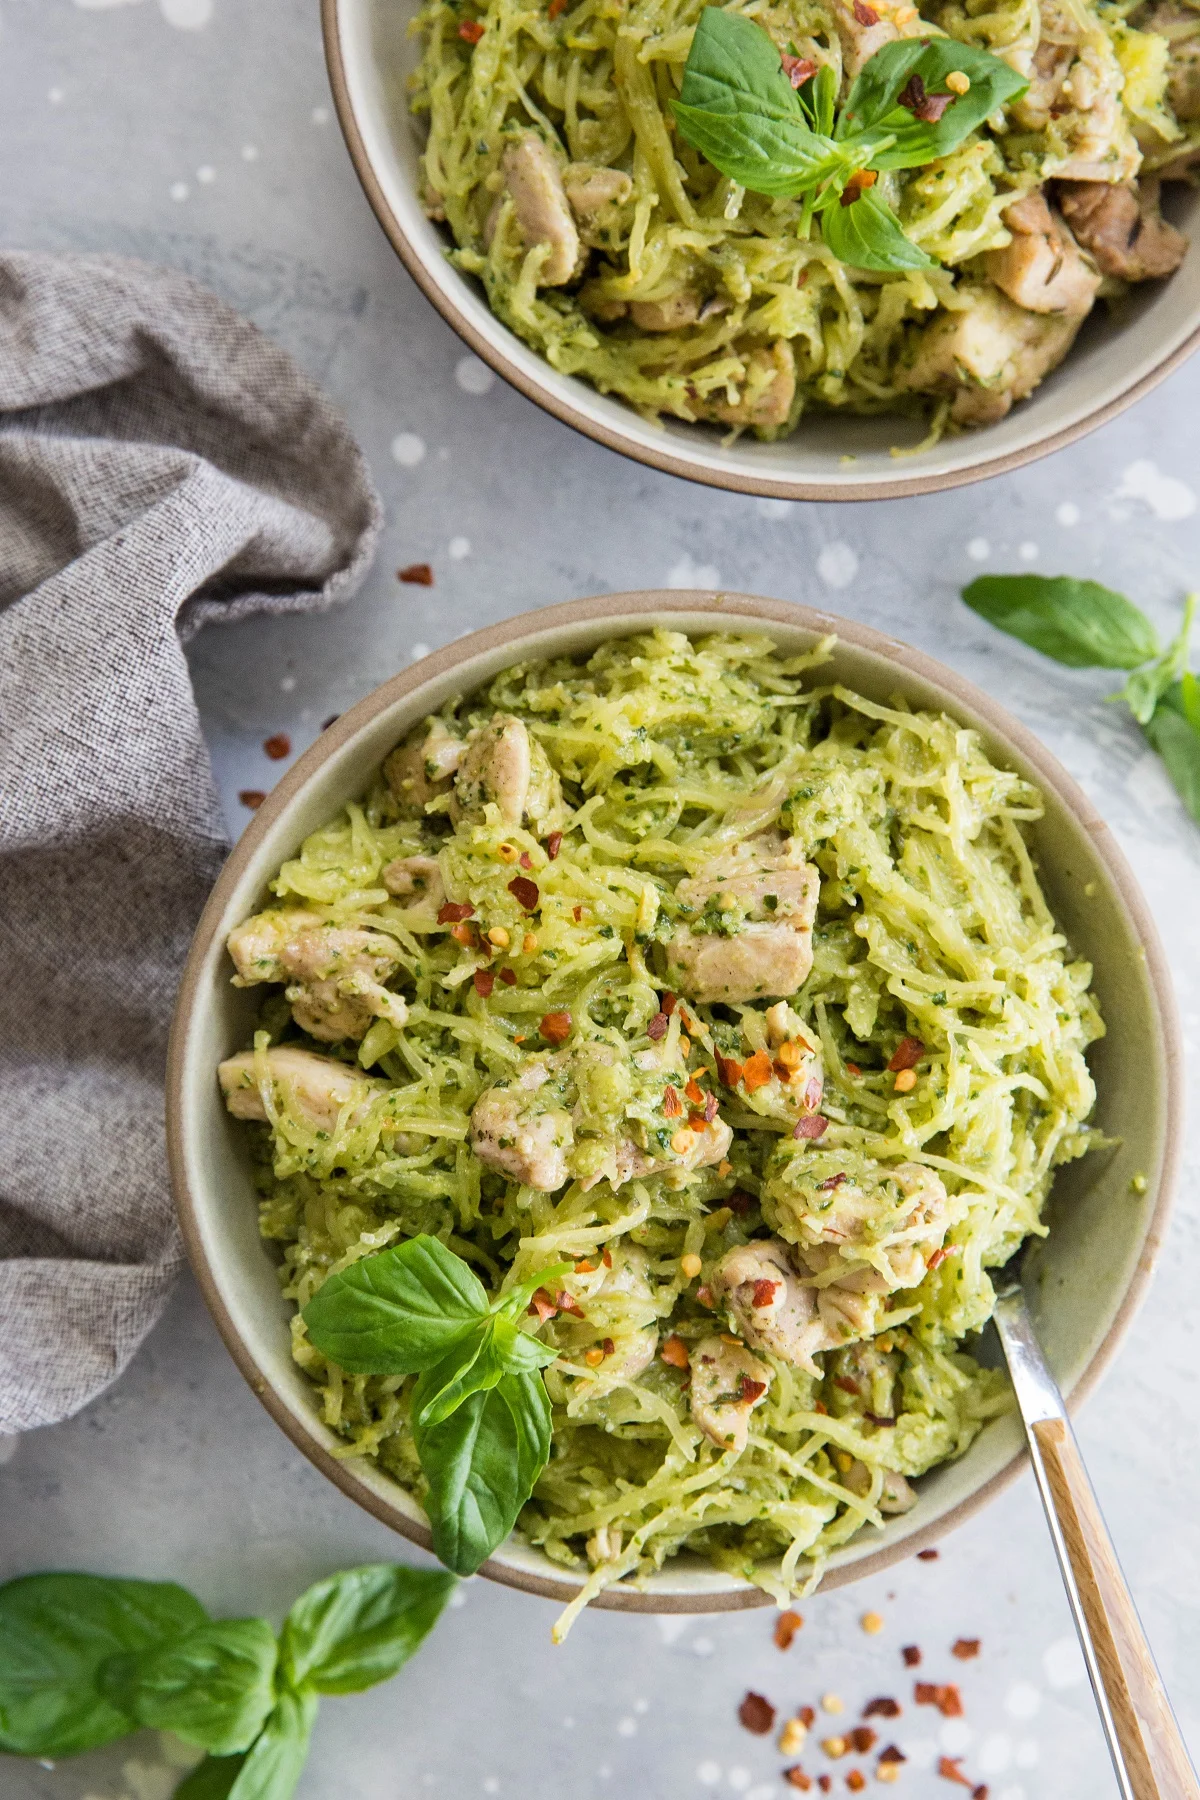 Chicken Pesto Spaghetti Squash - a clean dinner recipe that is paleo, keto, whole30 and easy to make | TheRoastedRoot.net #glutenfree #grainfree